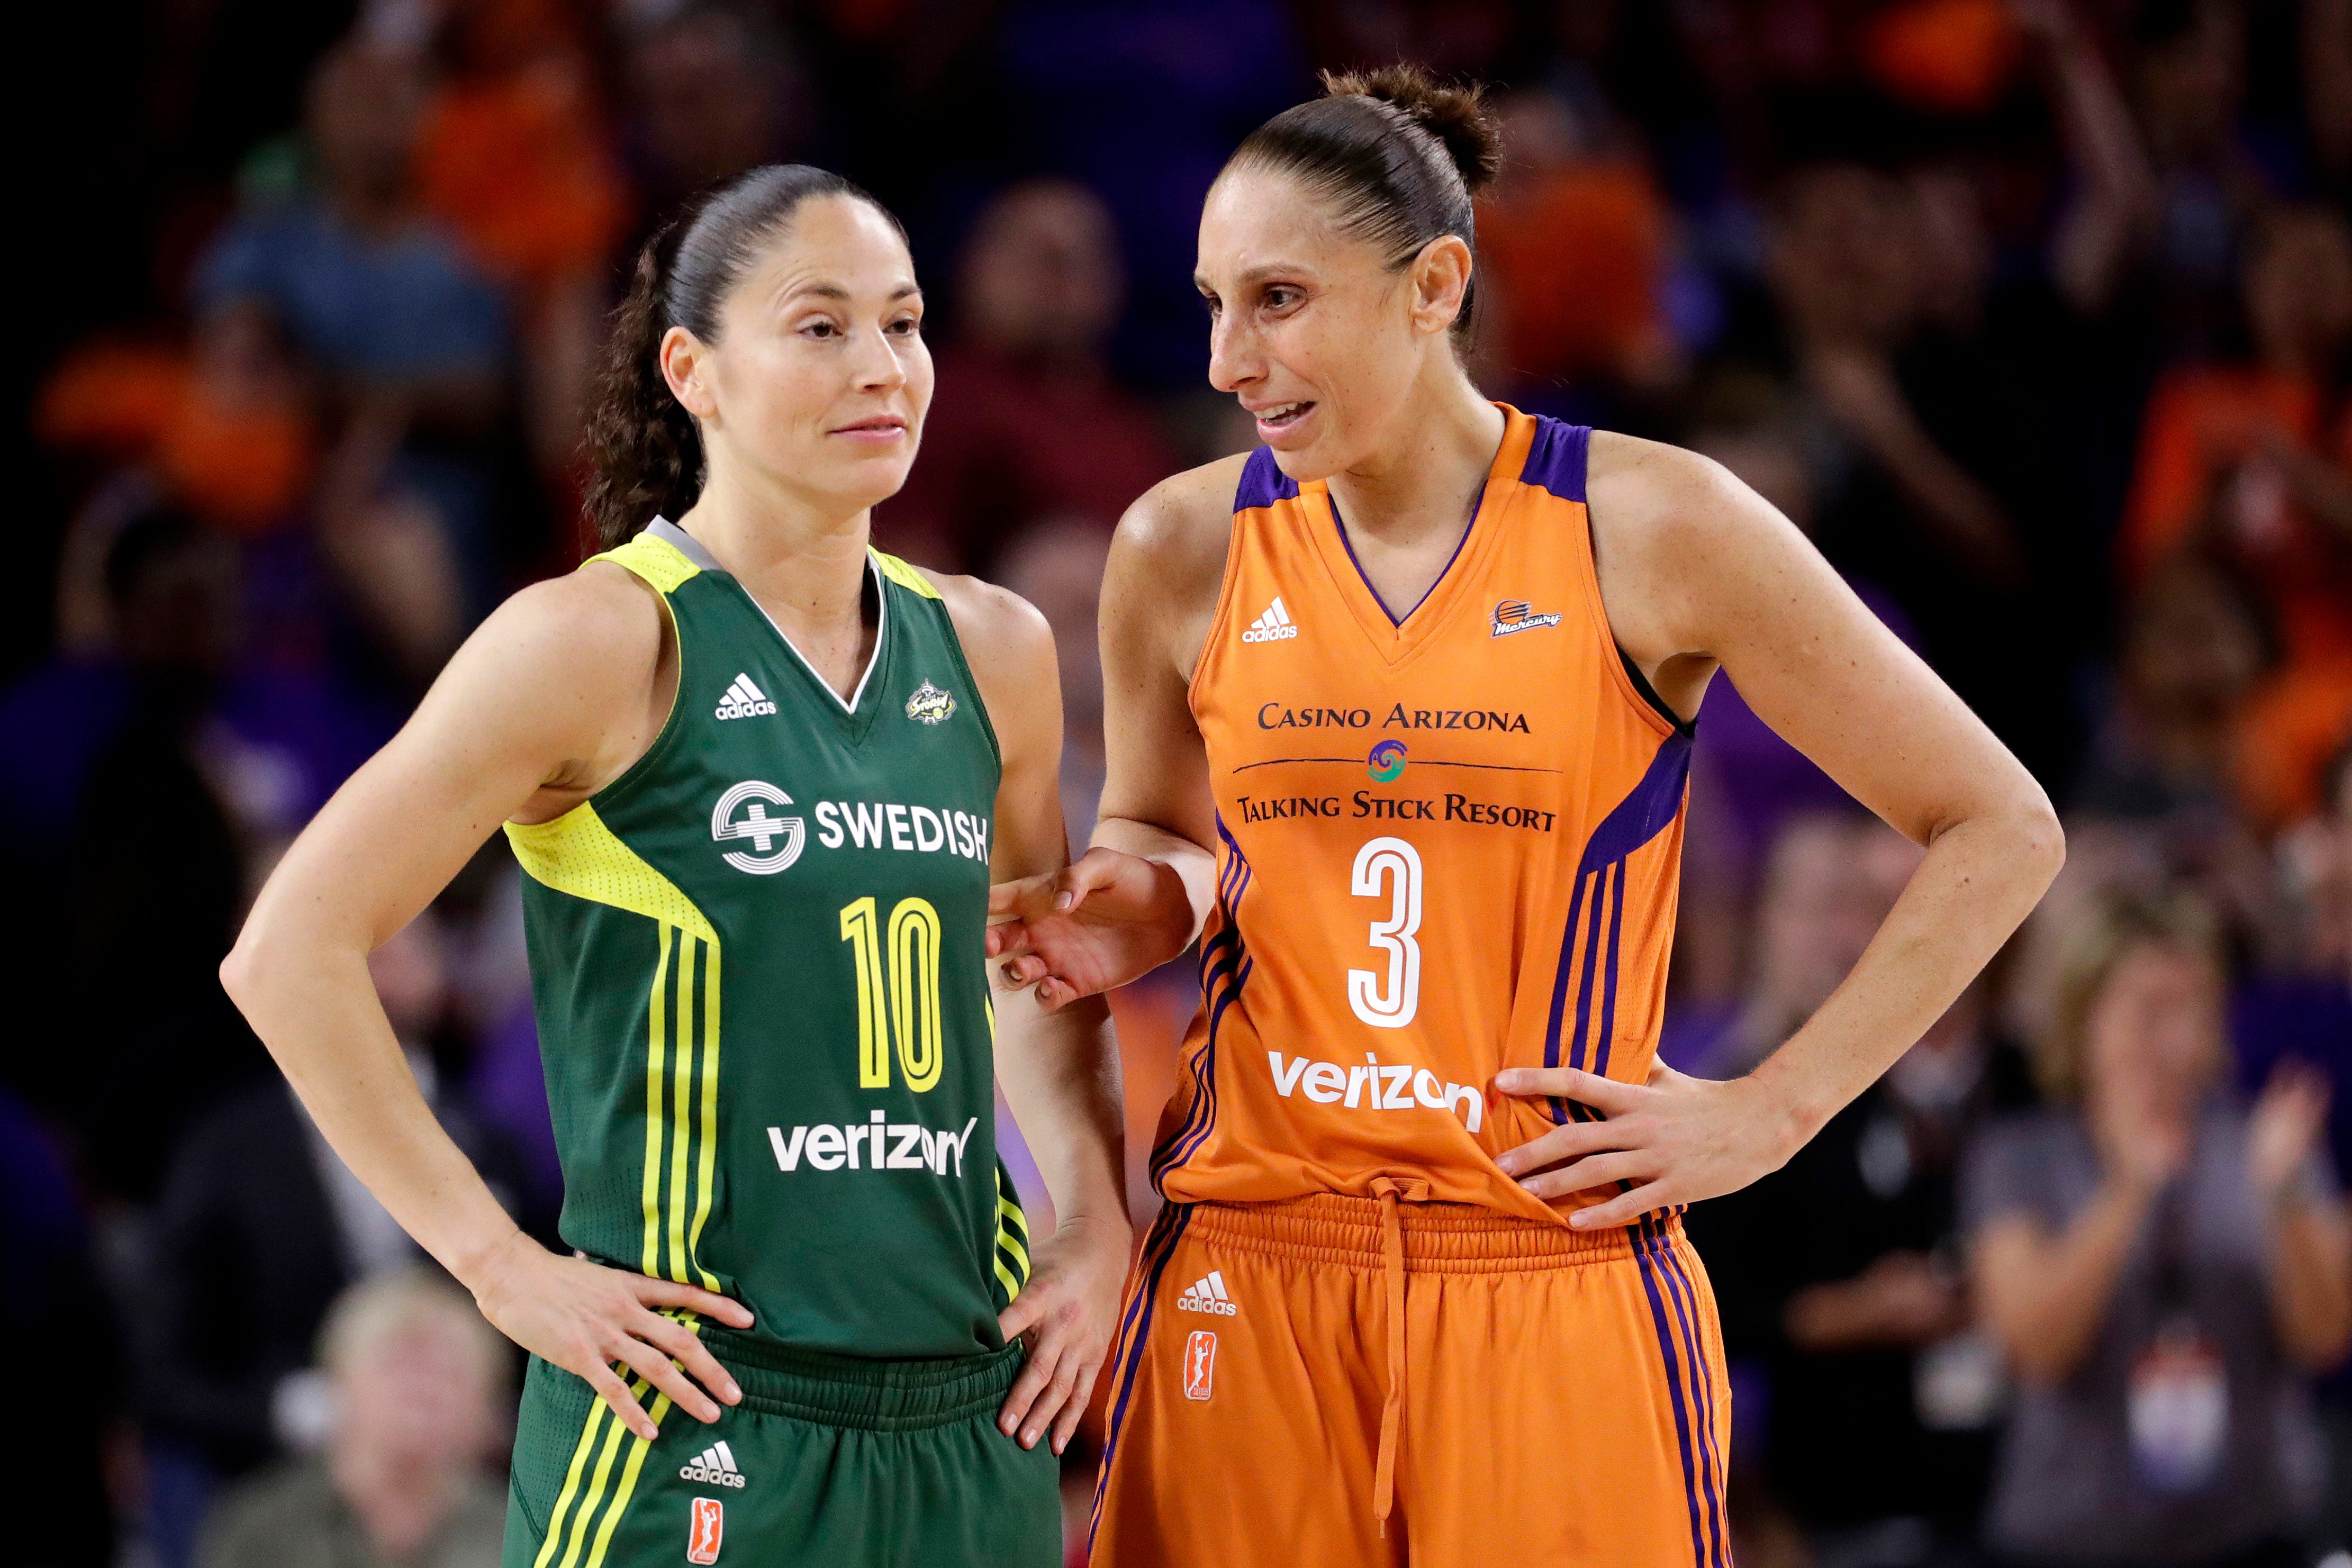 Wnba Players In The 21 Tokyo Olympics Full List Of Wnba Players